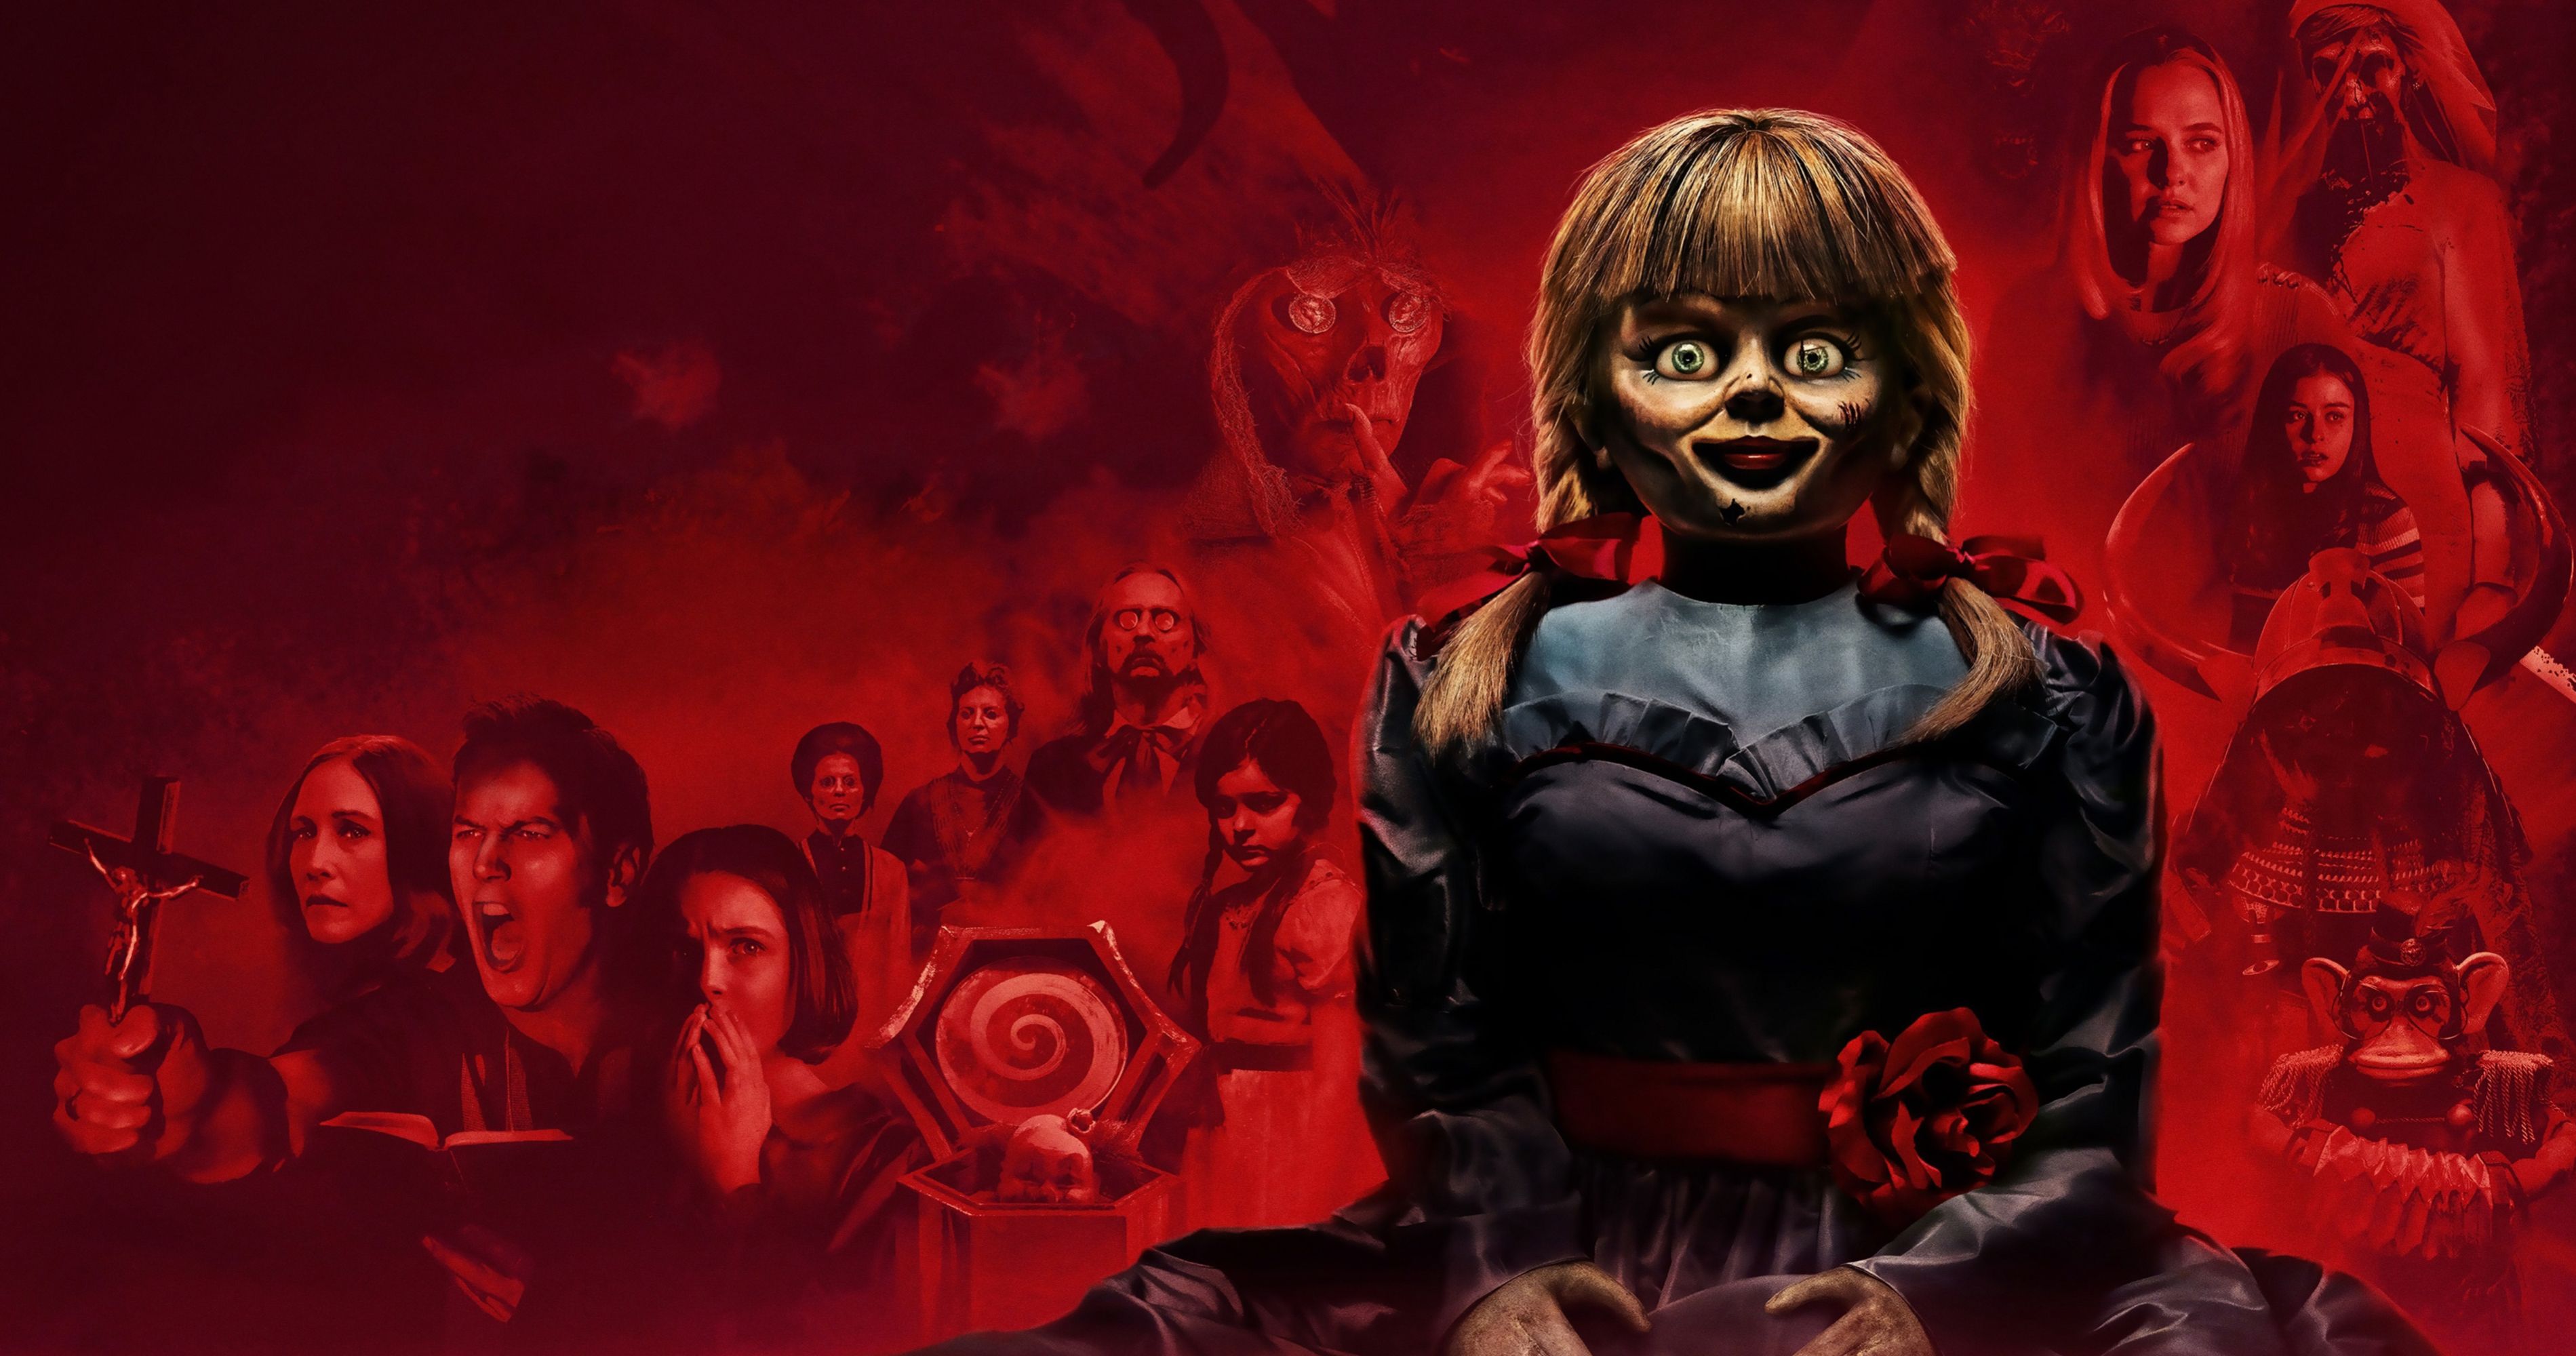 Annabelle Comes Home Wins Its R-Rating for Horror, Violence and Terror